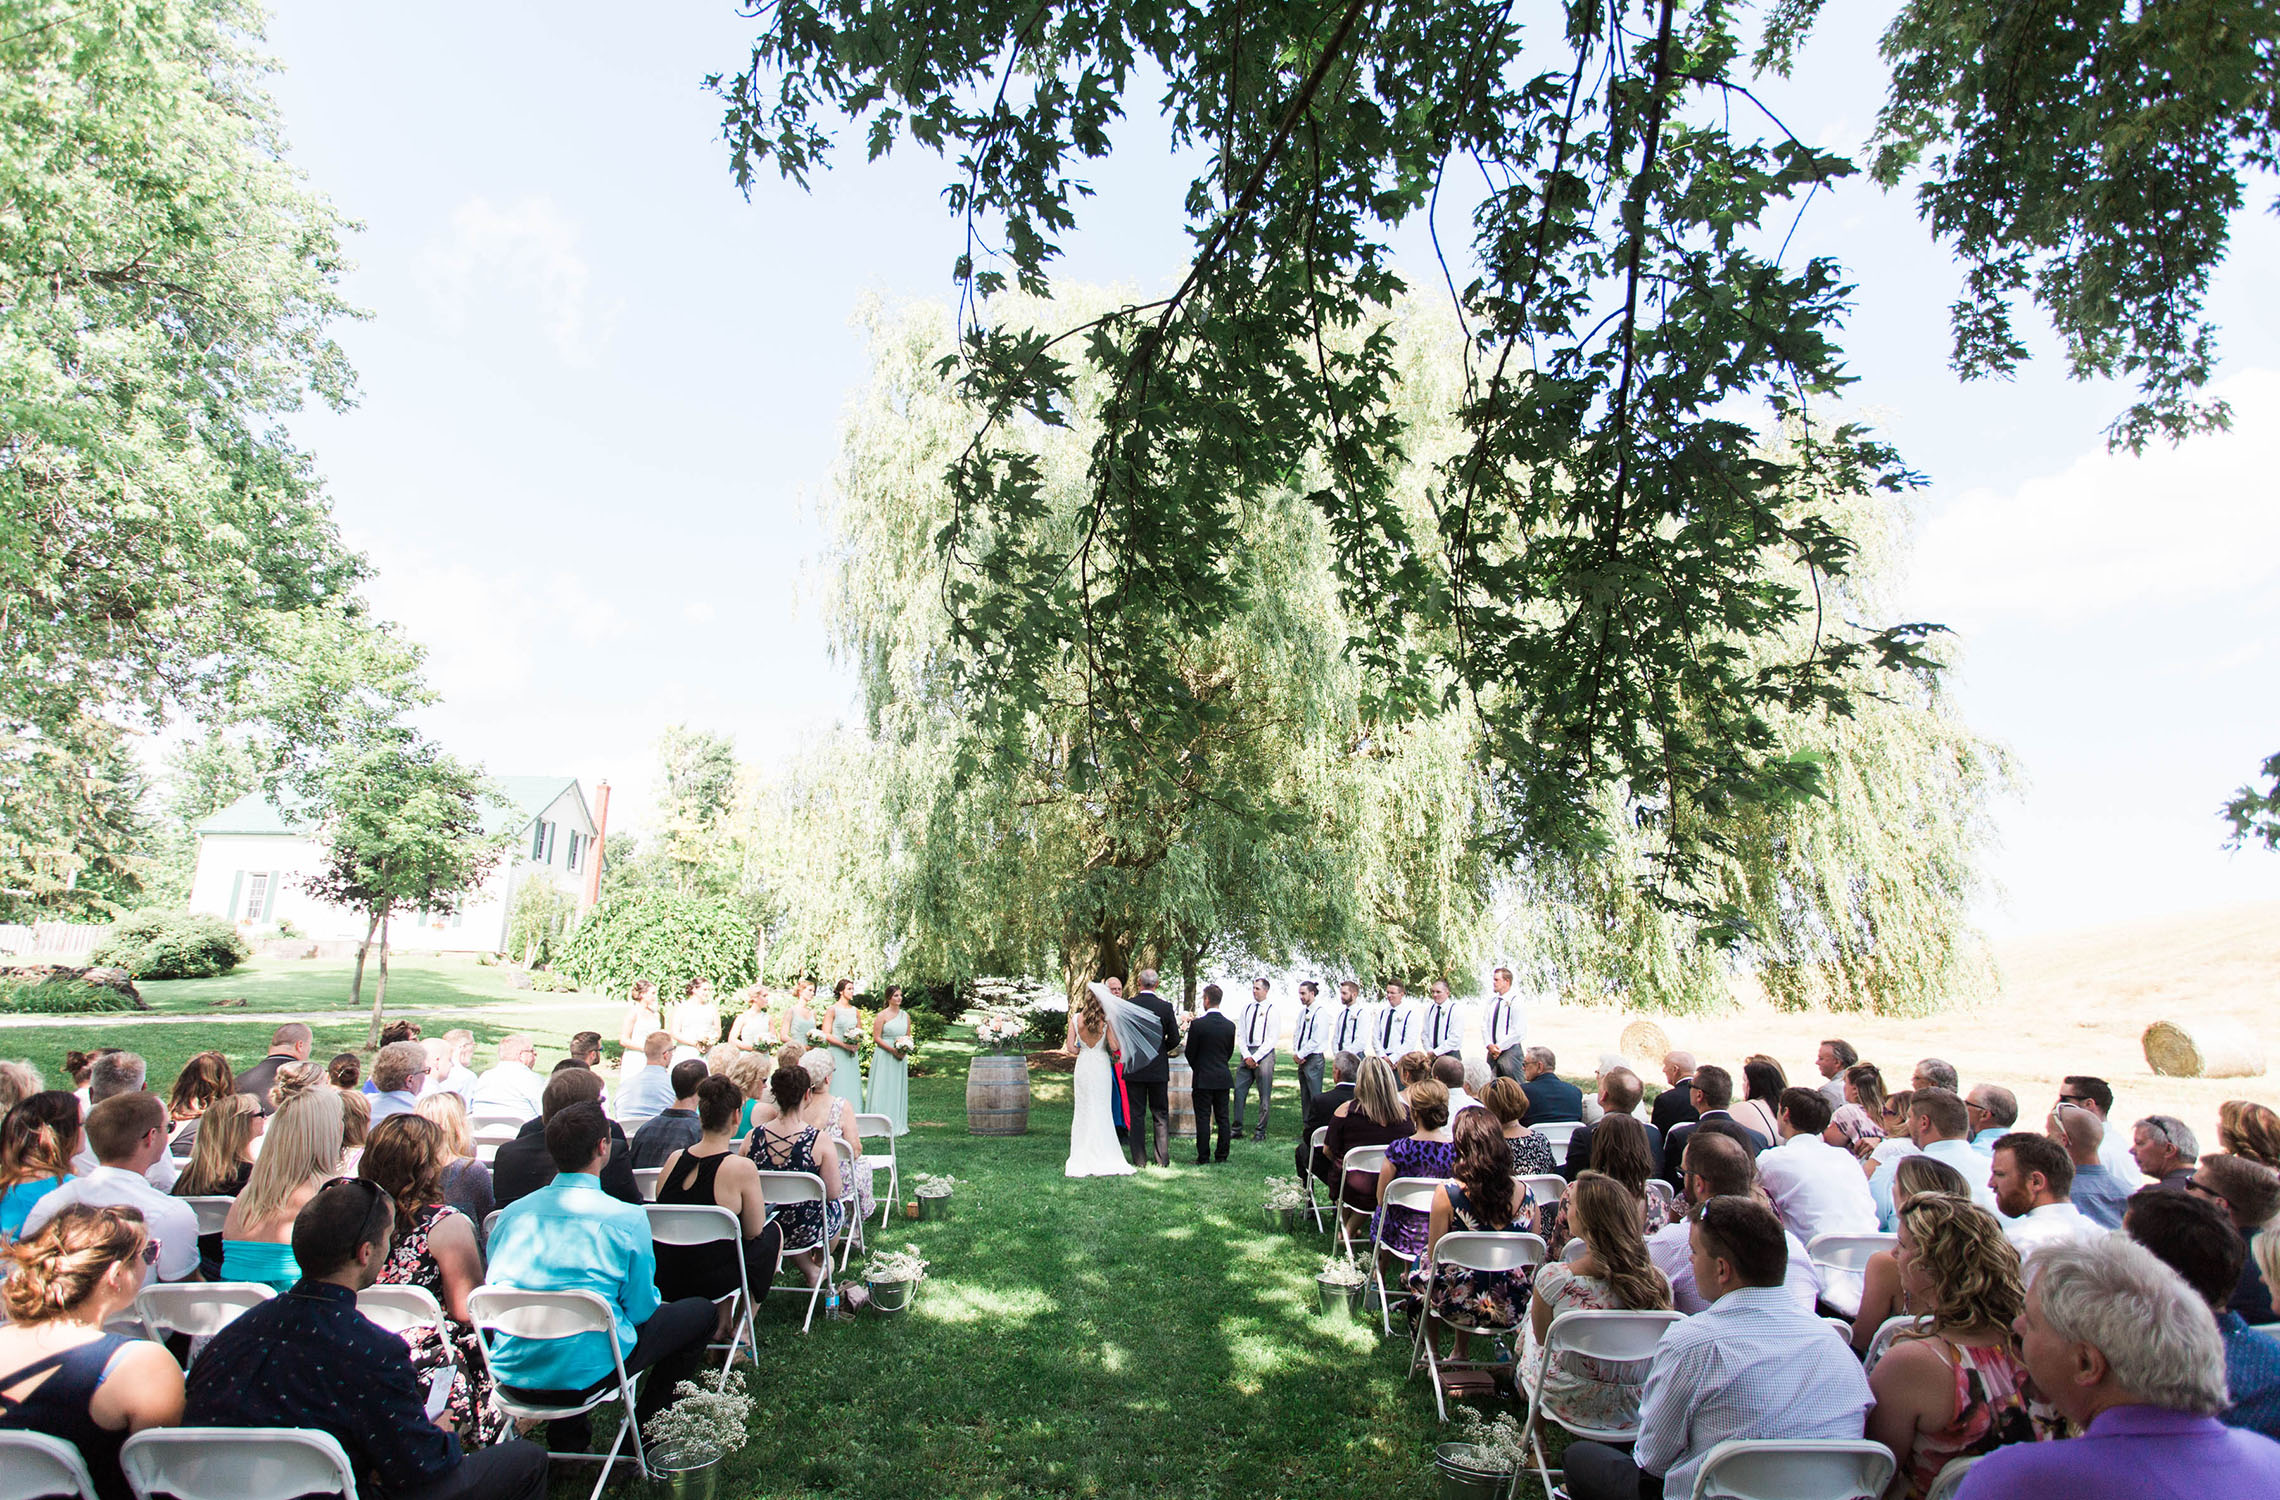 Willow trees hang over the bride and groom as they say their vows.